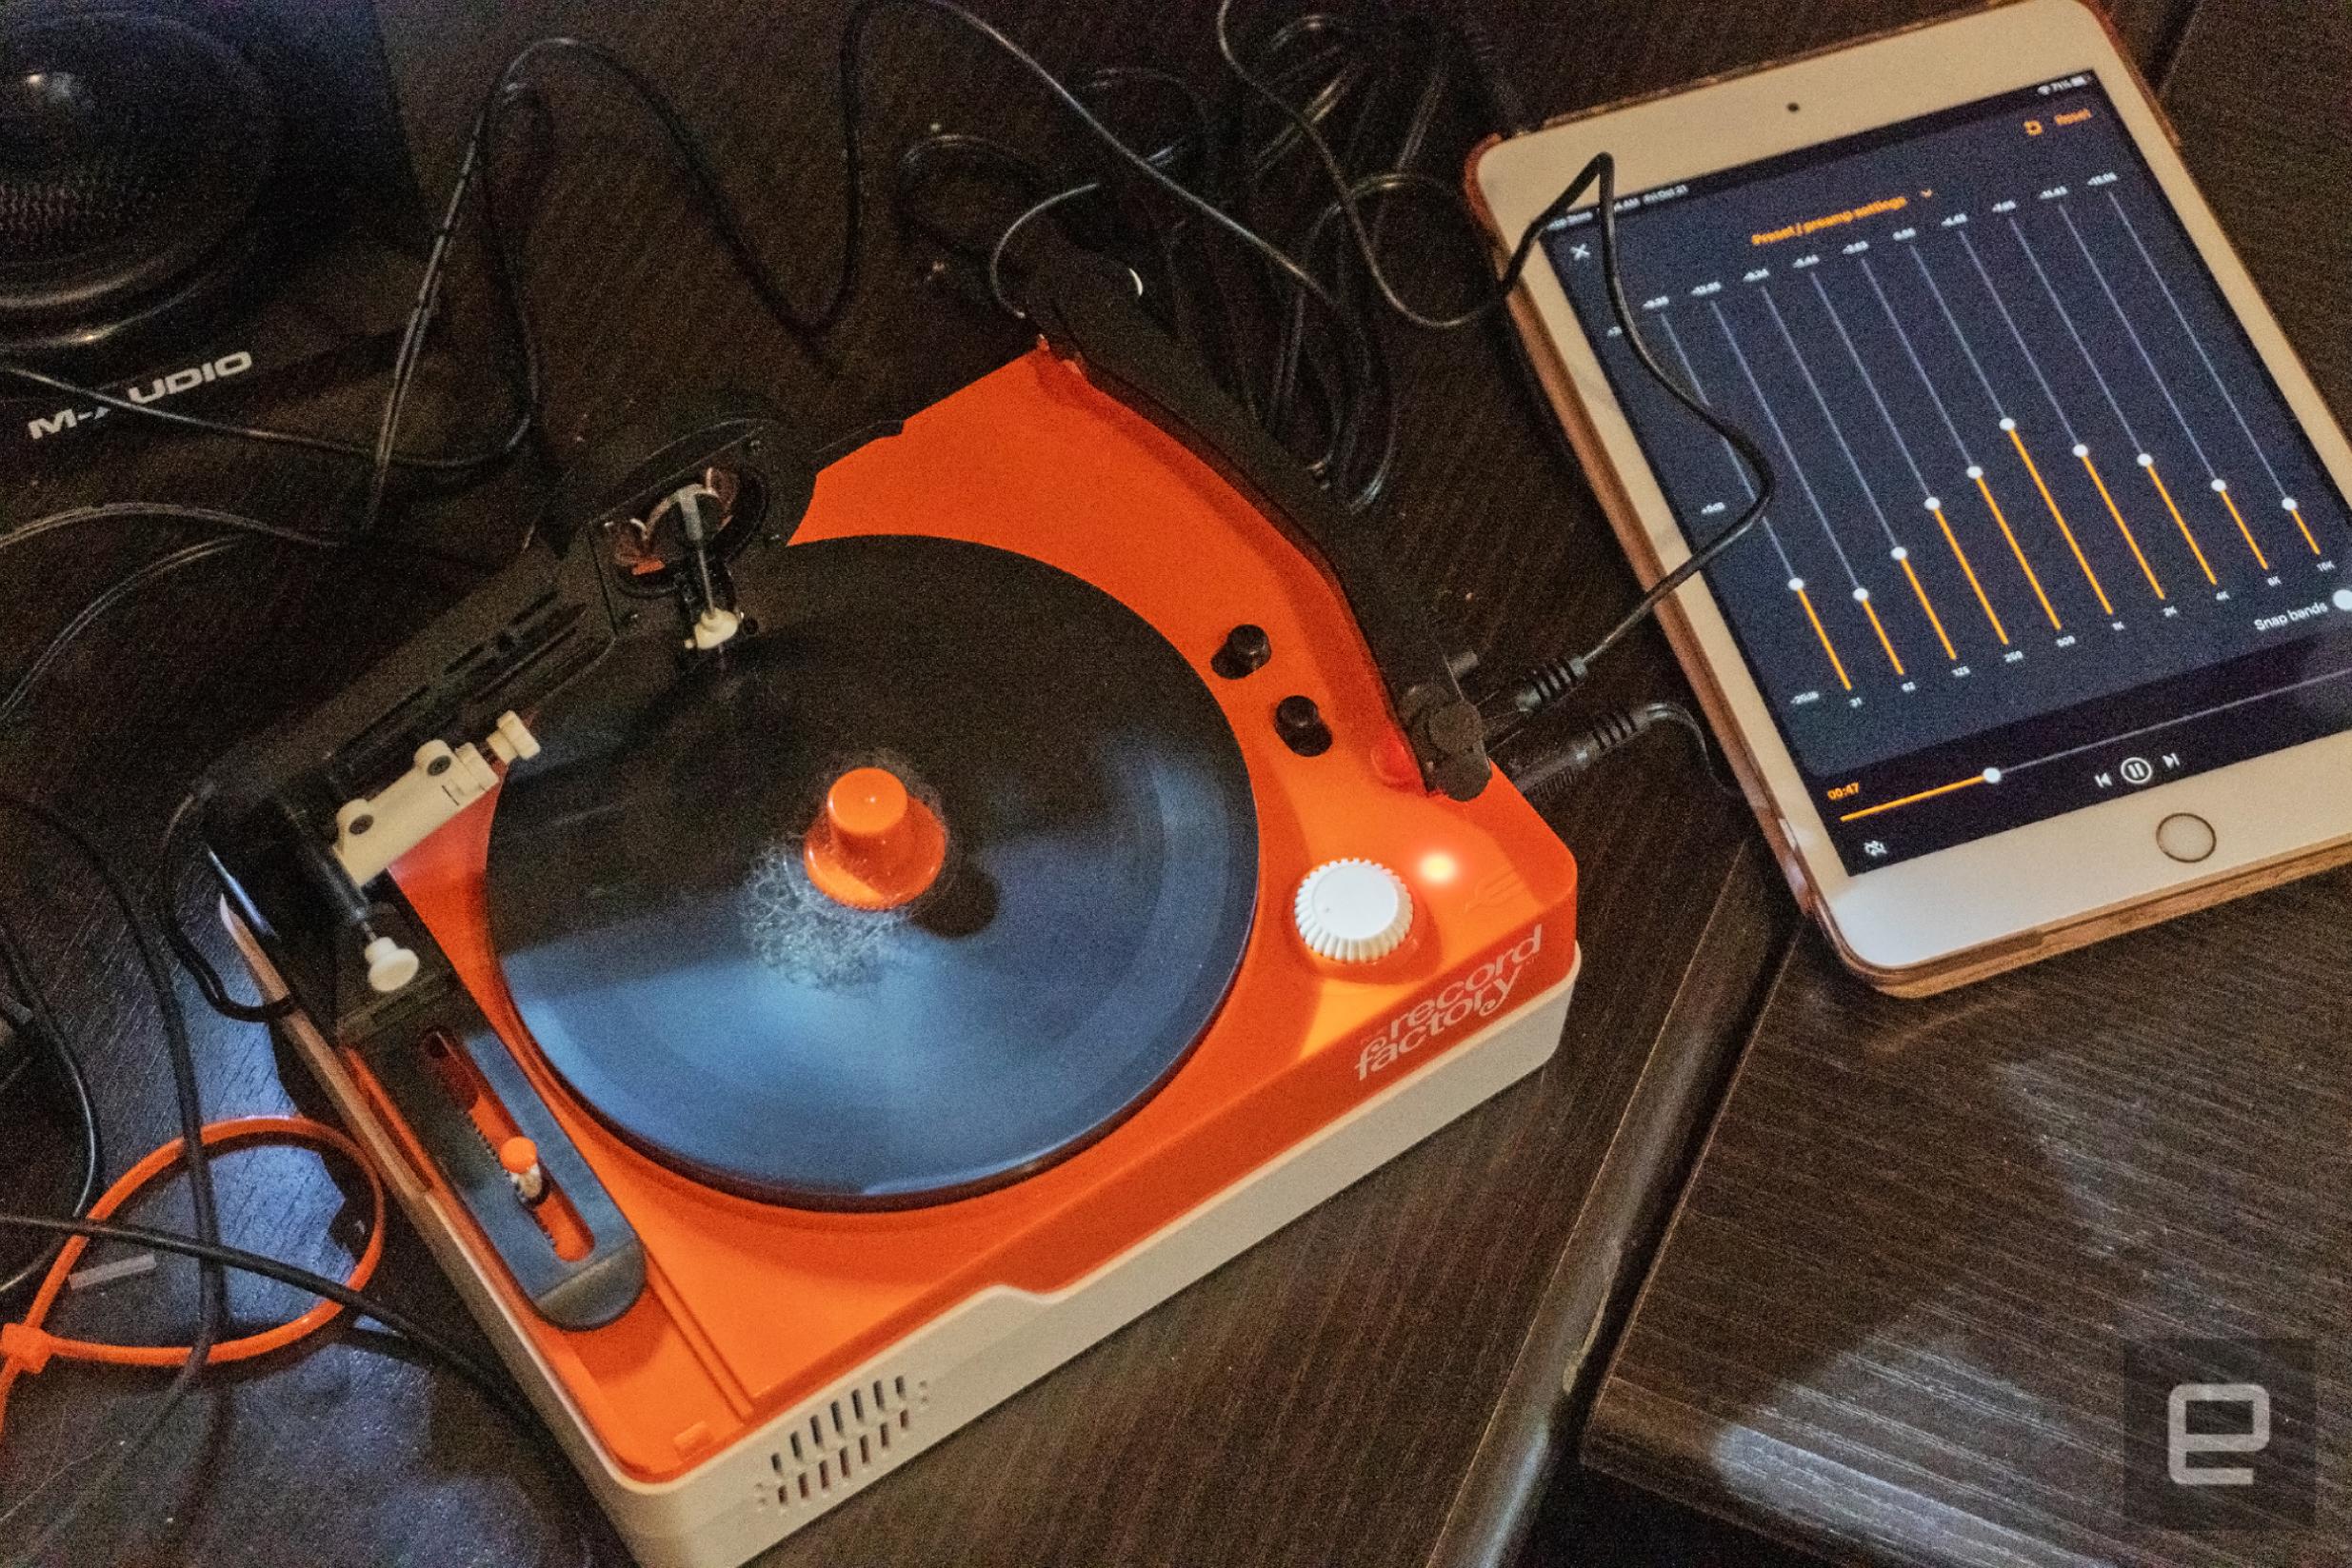 The Teenage Engineering Record Factory vinyl cutter in orange and white seen on a table cluttered with cables, audio gear and speakers.